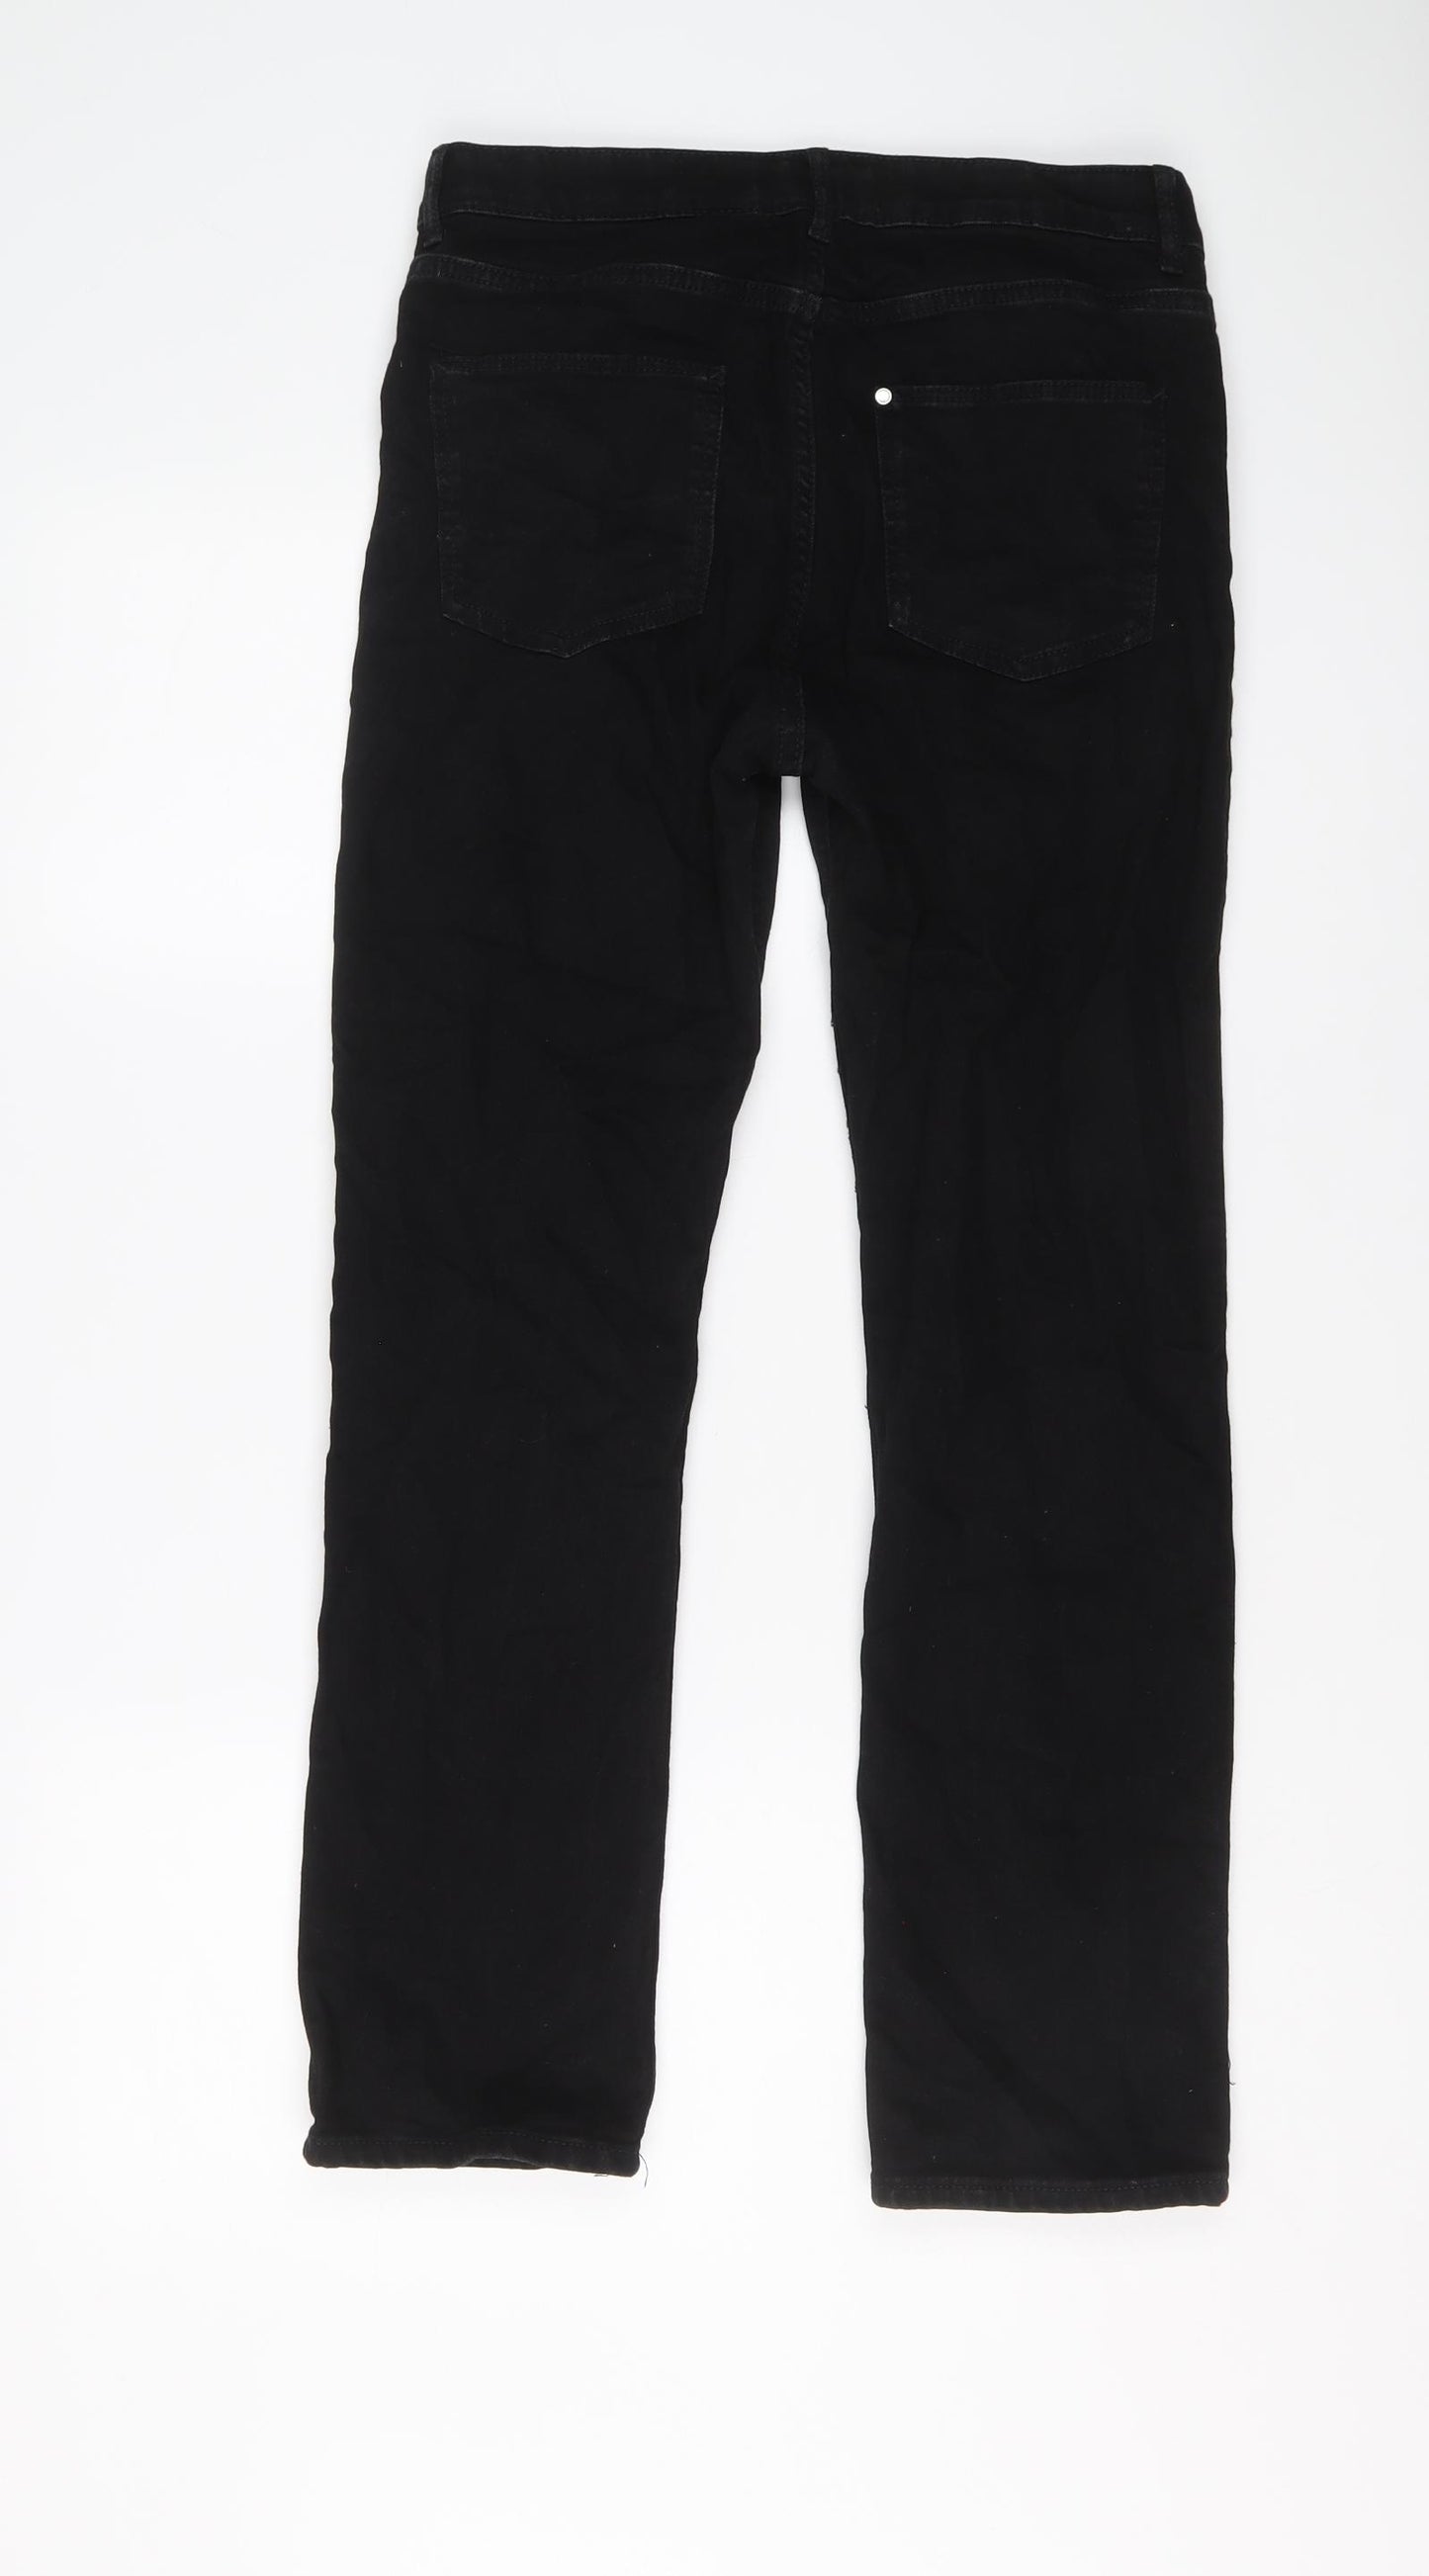 H&M Boys Black Cotton Straight Jeans Size 14 Years Regular Button